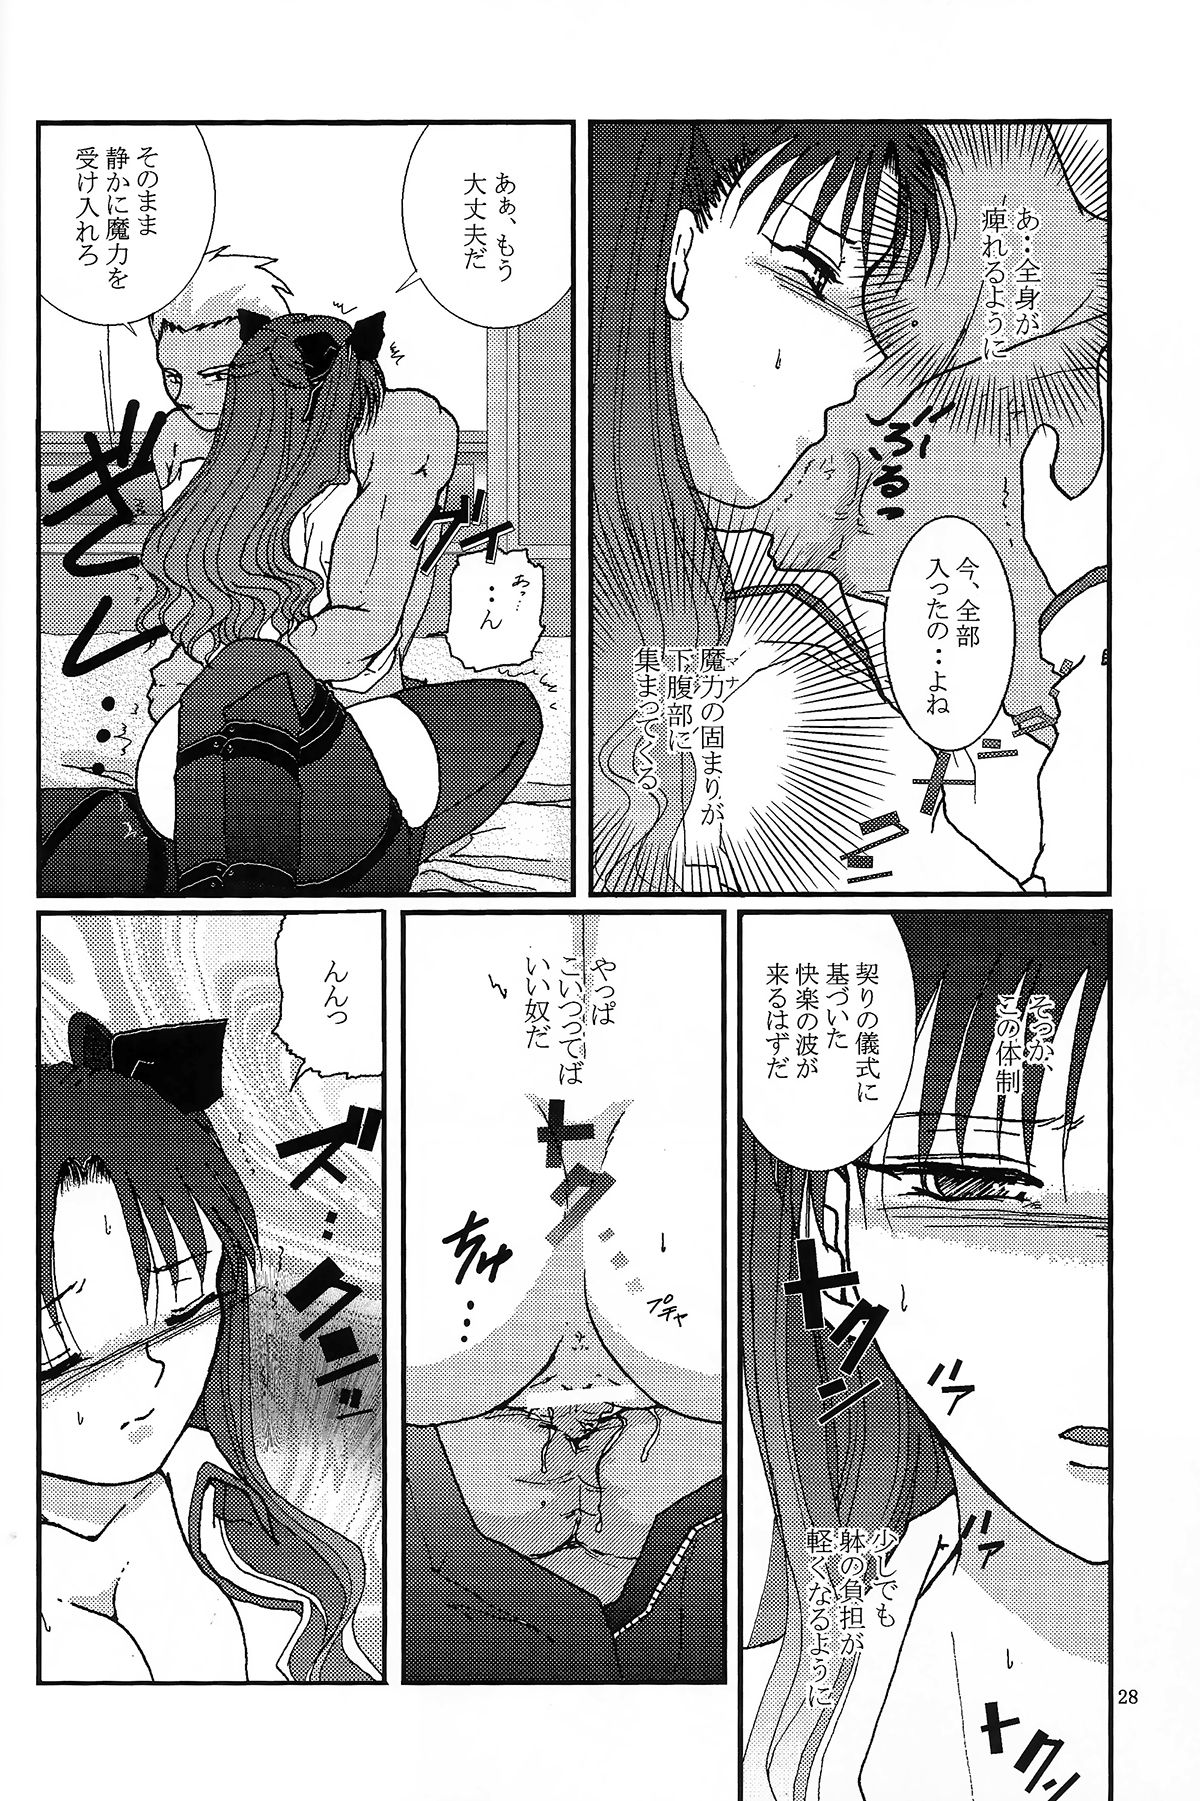 (SC24) [Takeda Syouten (Takeda Sora)] Question-7 (Fate/stay night) page 26 full